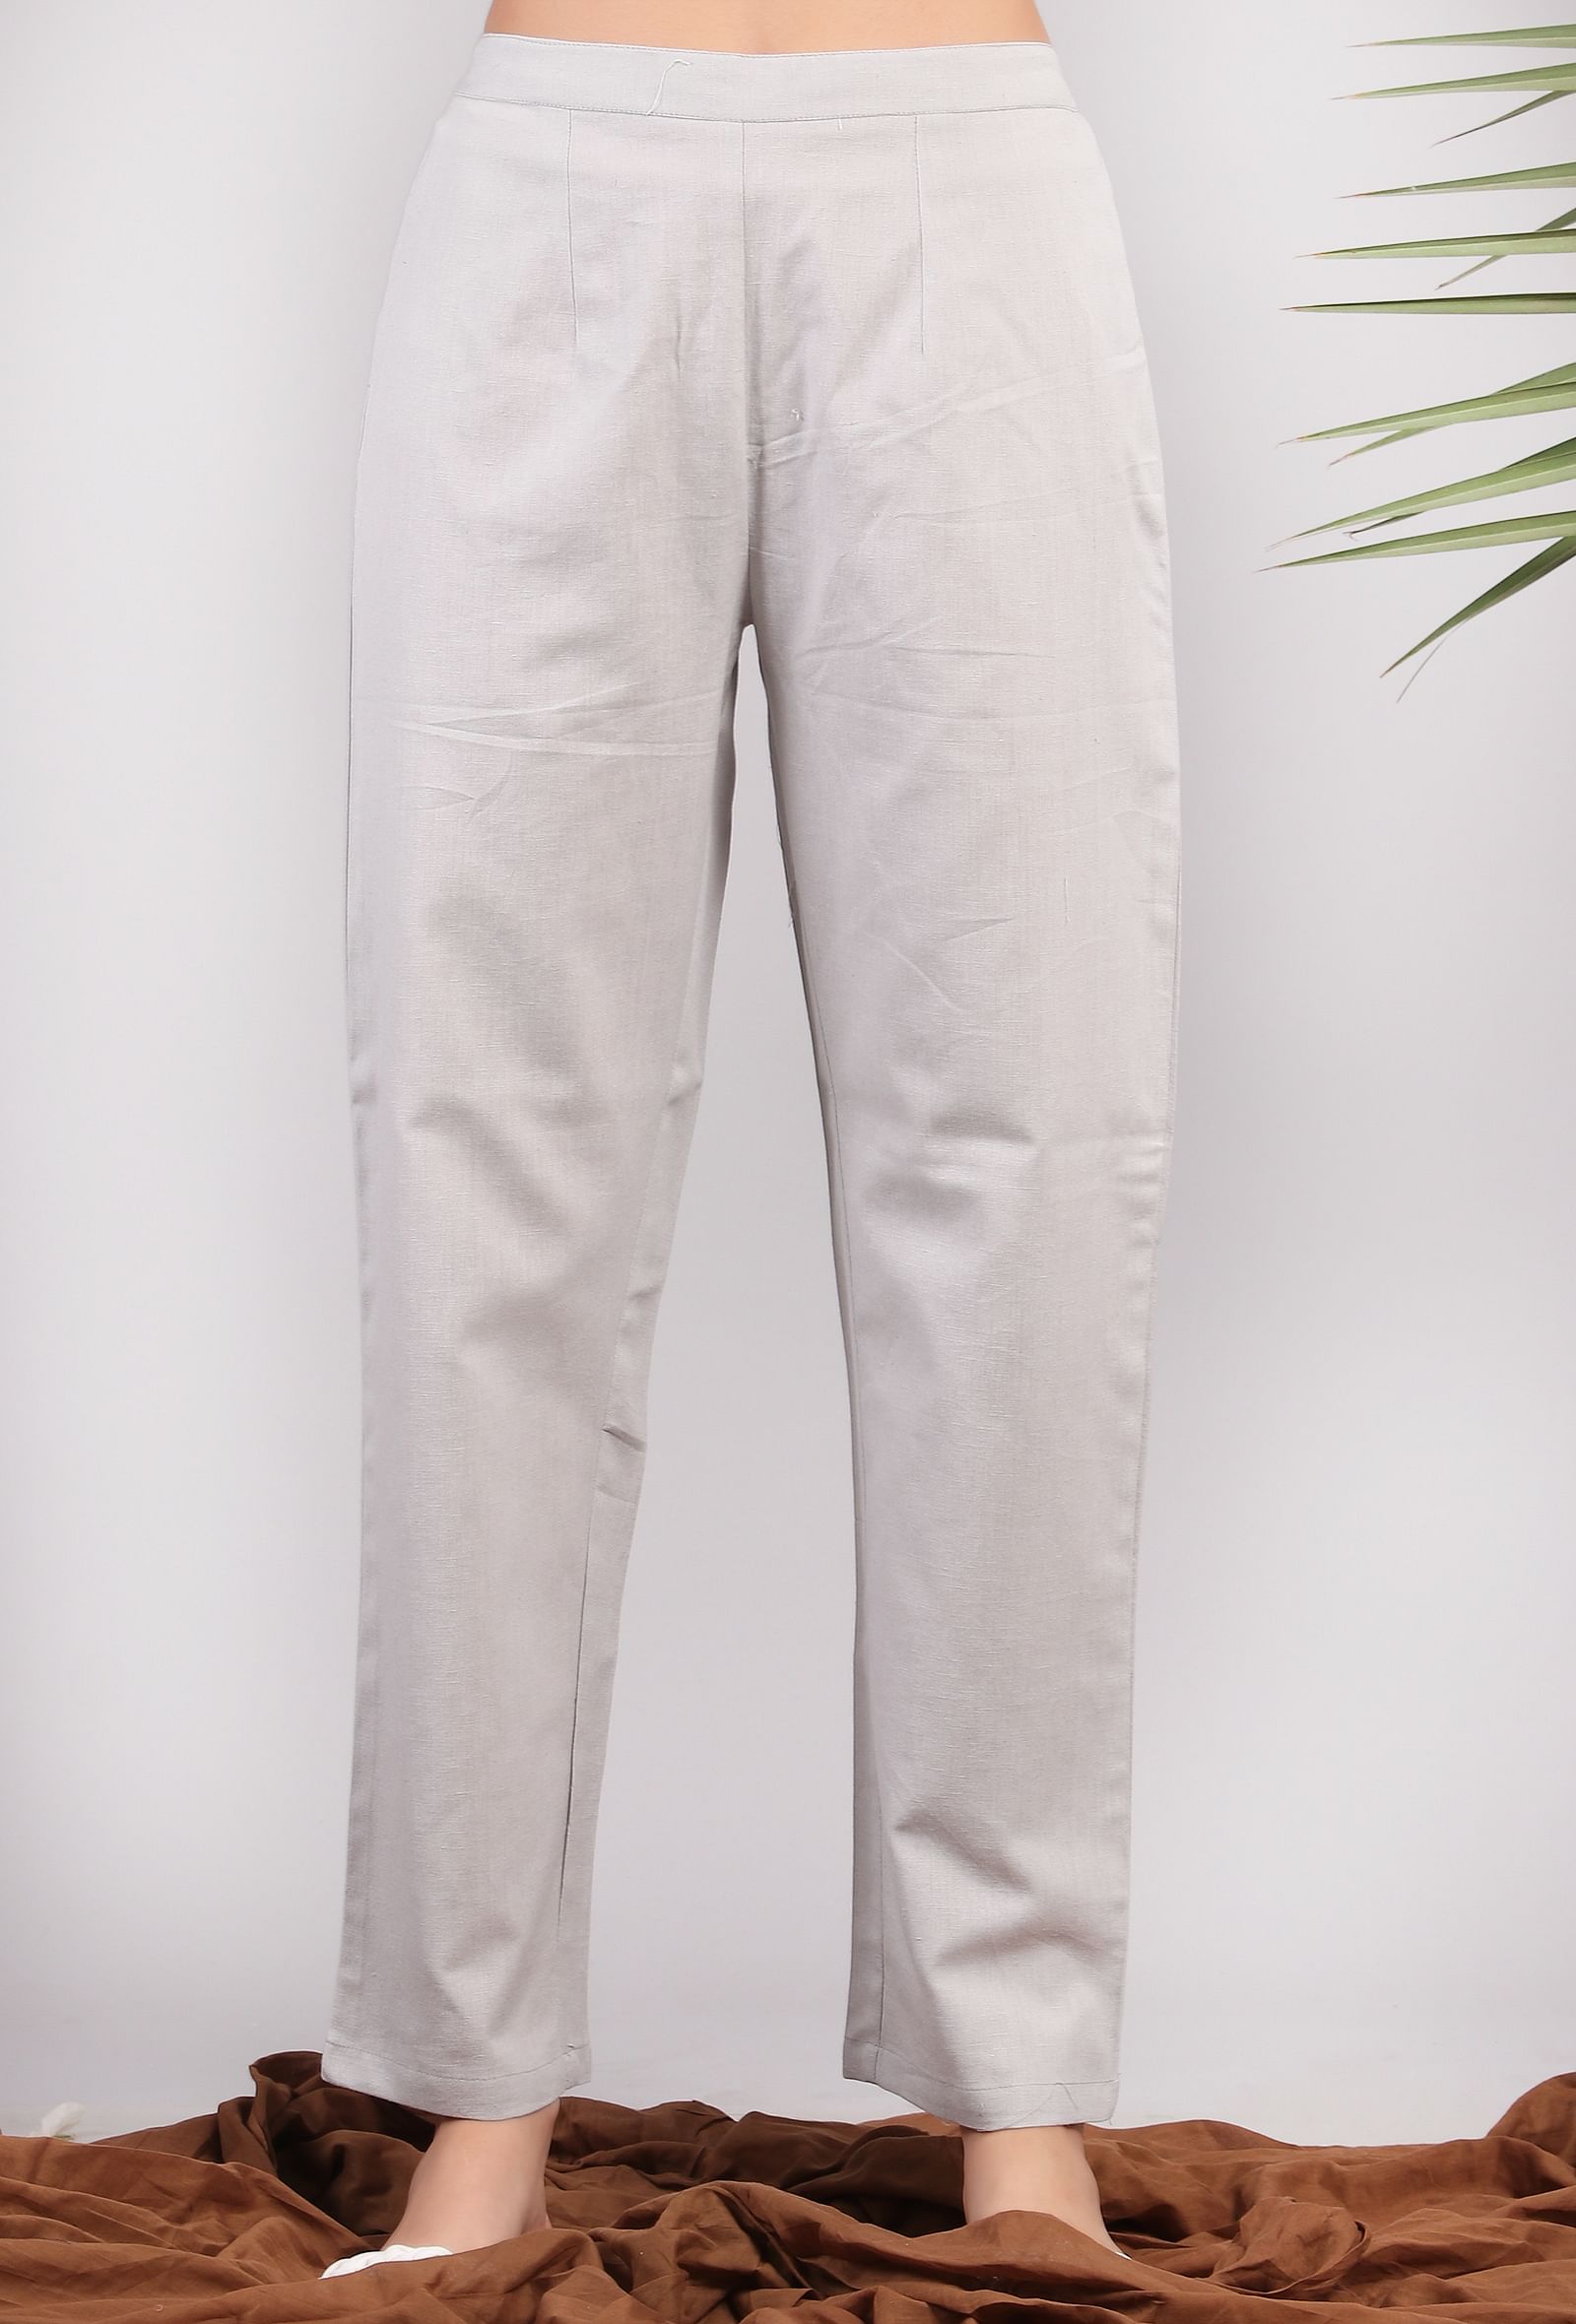 Buy White Handcrafted Narrow Cotton Pants